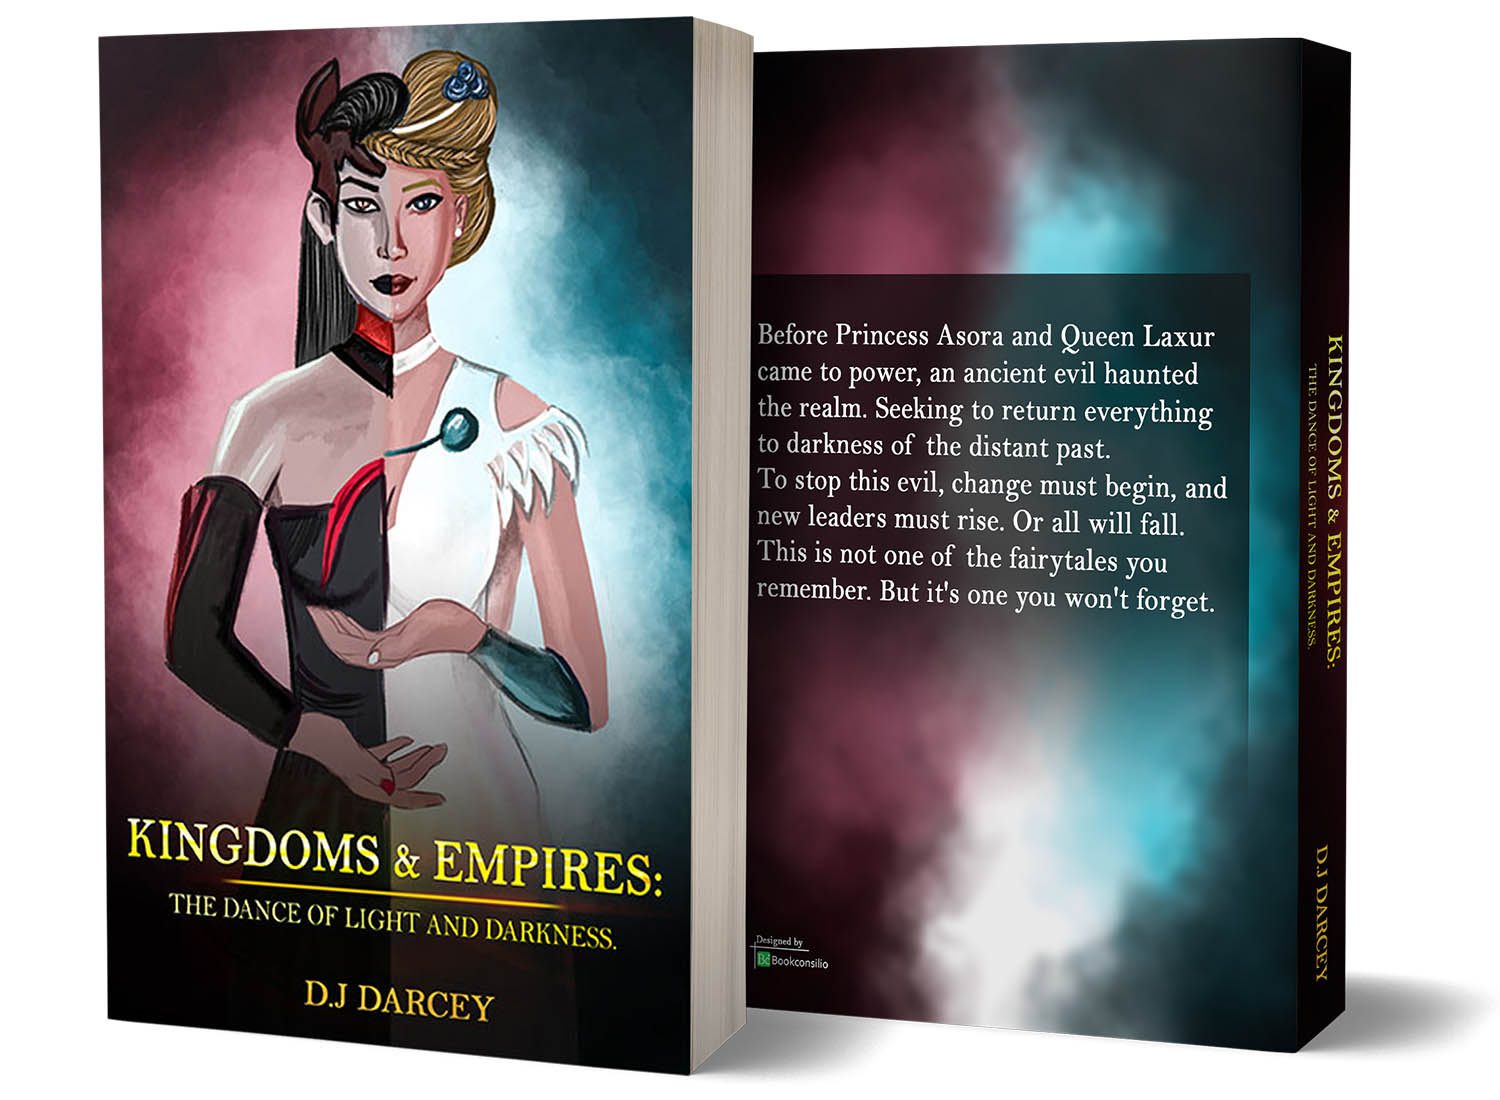 mrismailben-portfolio-kingdomes-and-empires--the-dance-of-light-and-darkness-paperback-bookcoverdesign